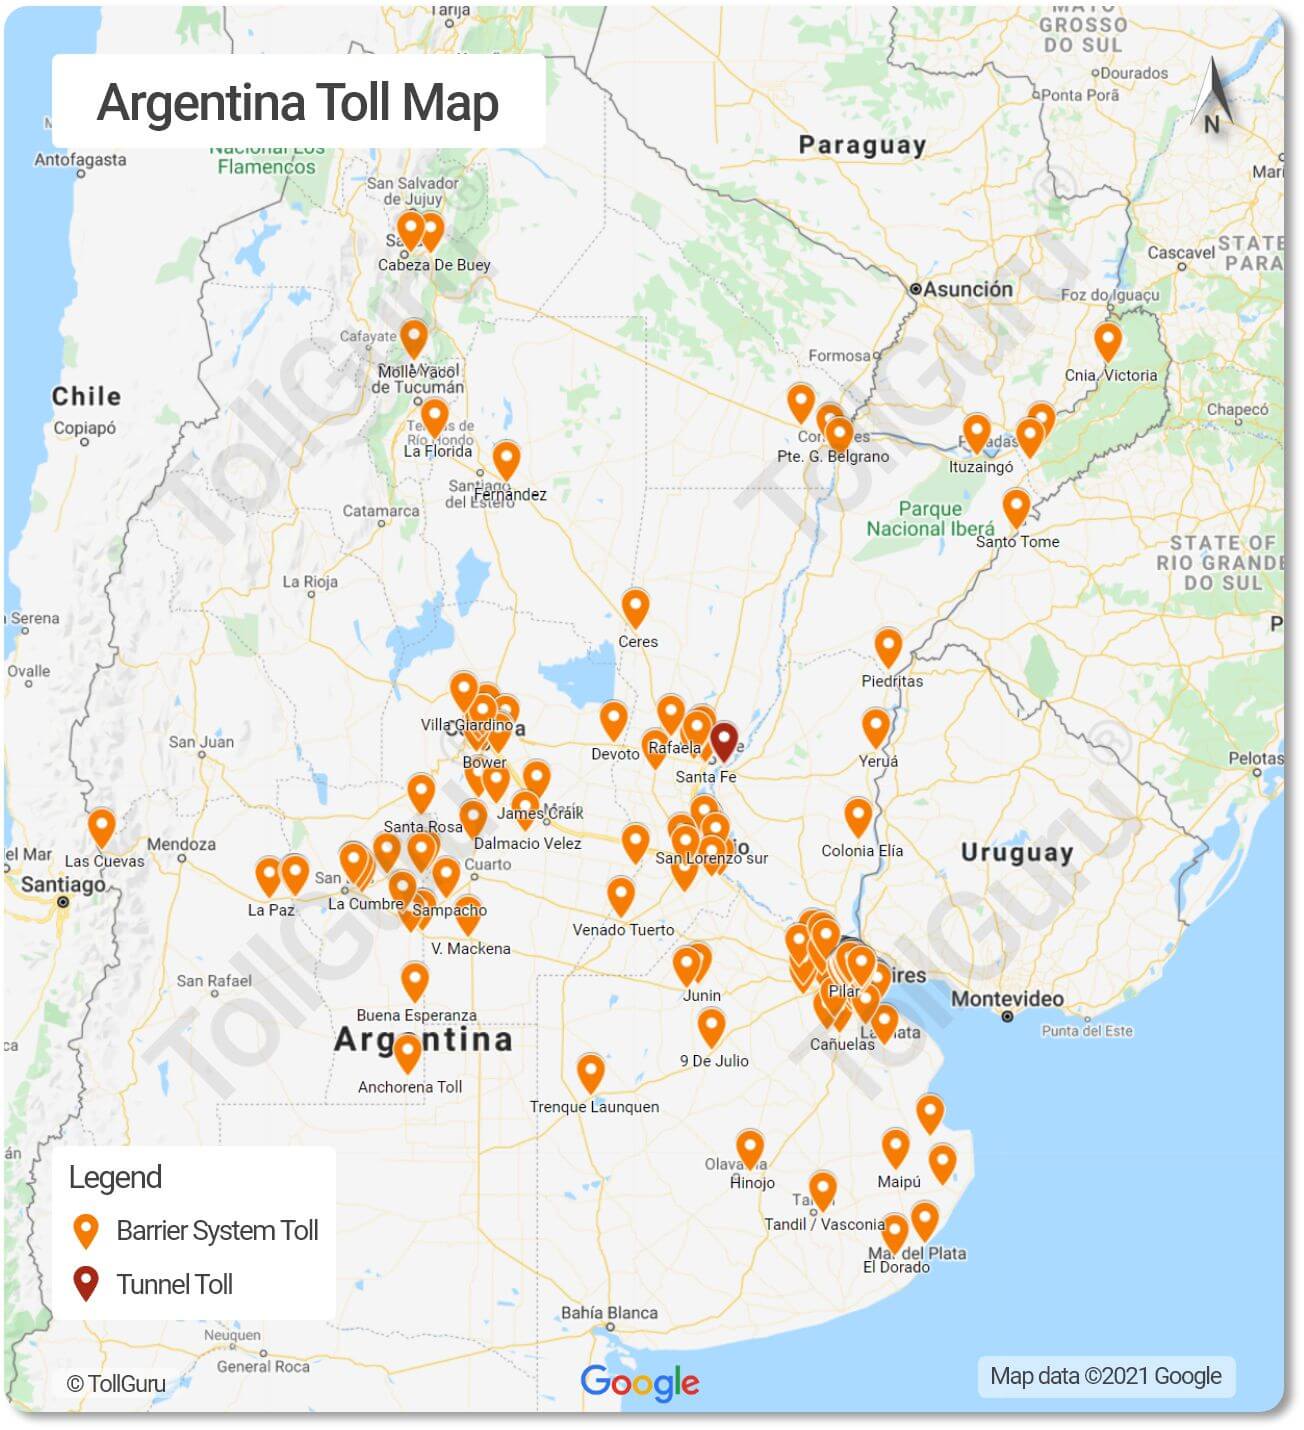 Toll plazas of Argentina for all Corridors, Accesos and National Route Network including National Route 1 and Riccheri Highway.